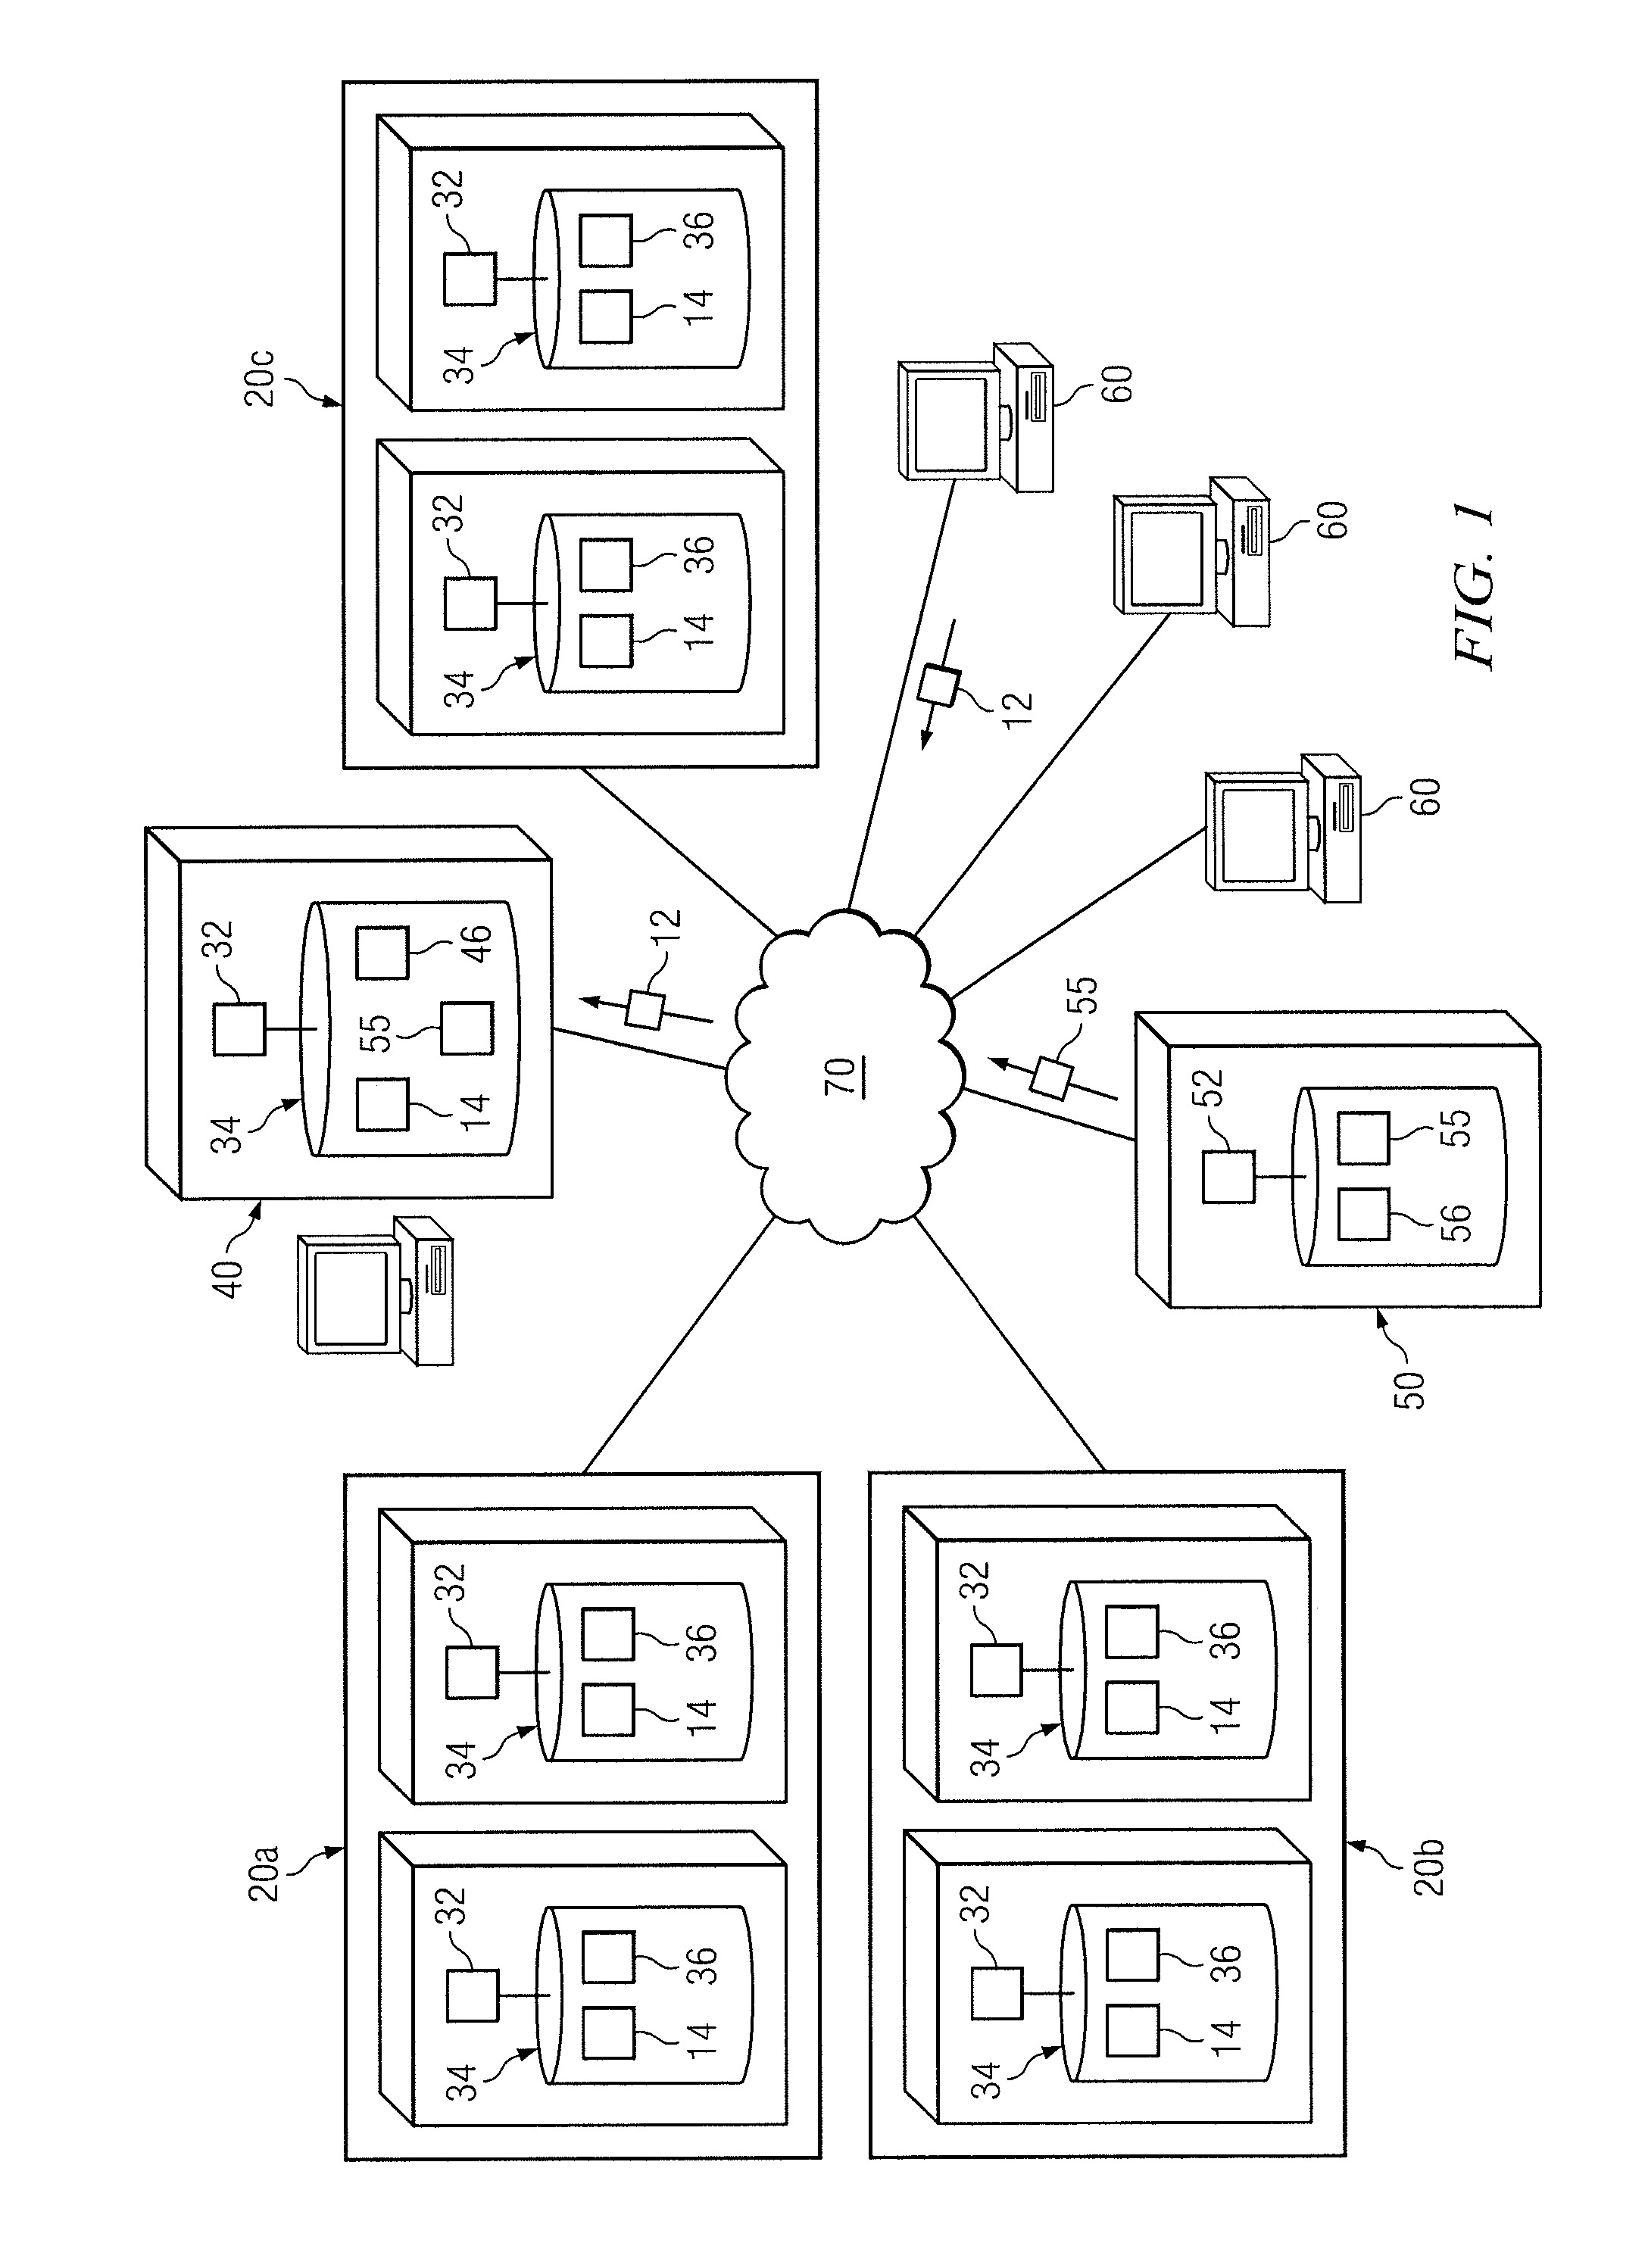 System and method for datacenter power management